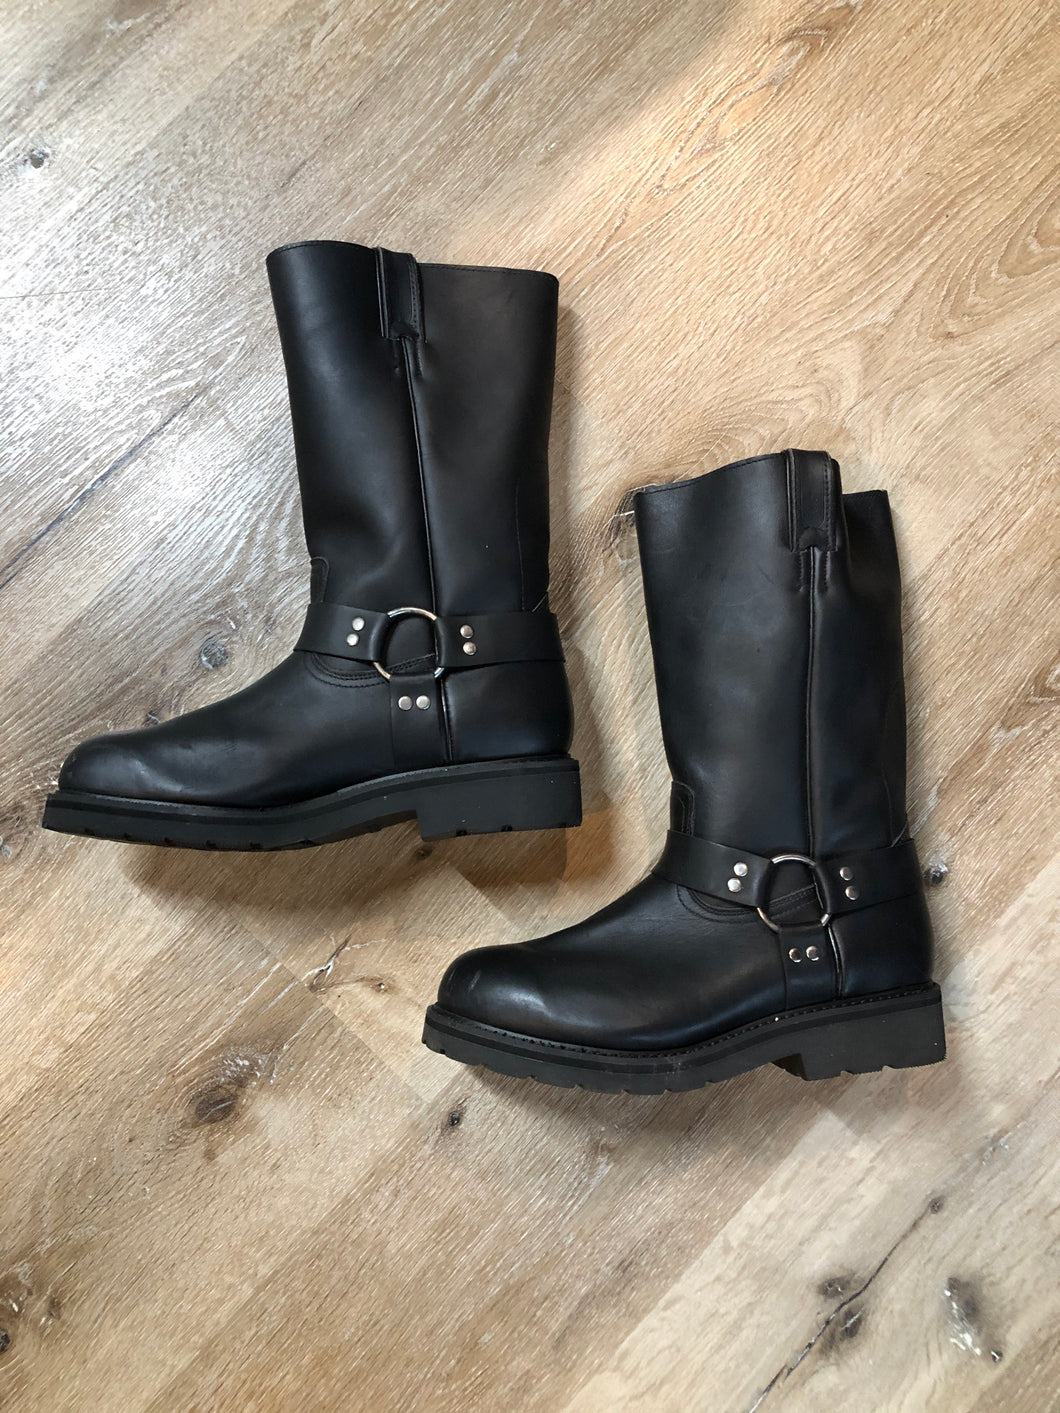 Kingspier Vintage - Boulet black motorcycle boots with harness strap and rounded toe. Made in Canada.

Size 9 Mens 

The uppers and soles are in excellent condition.